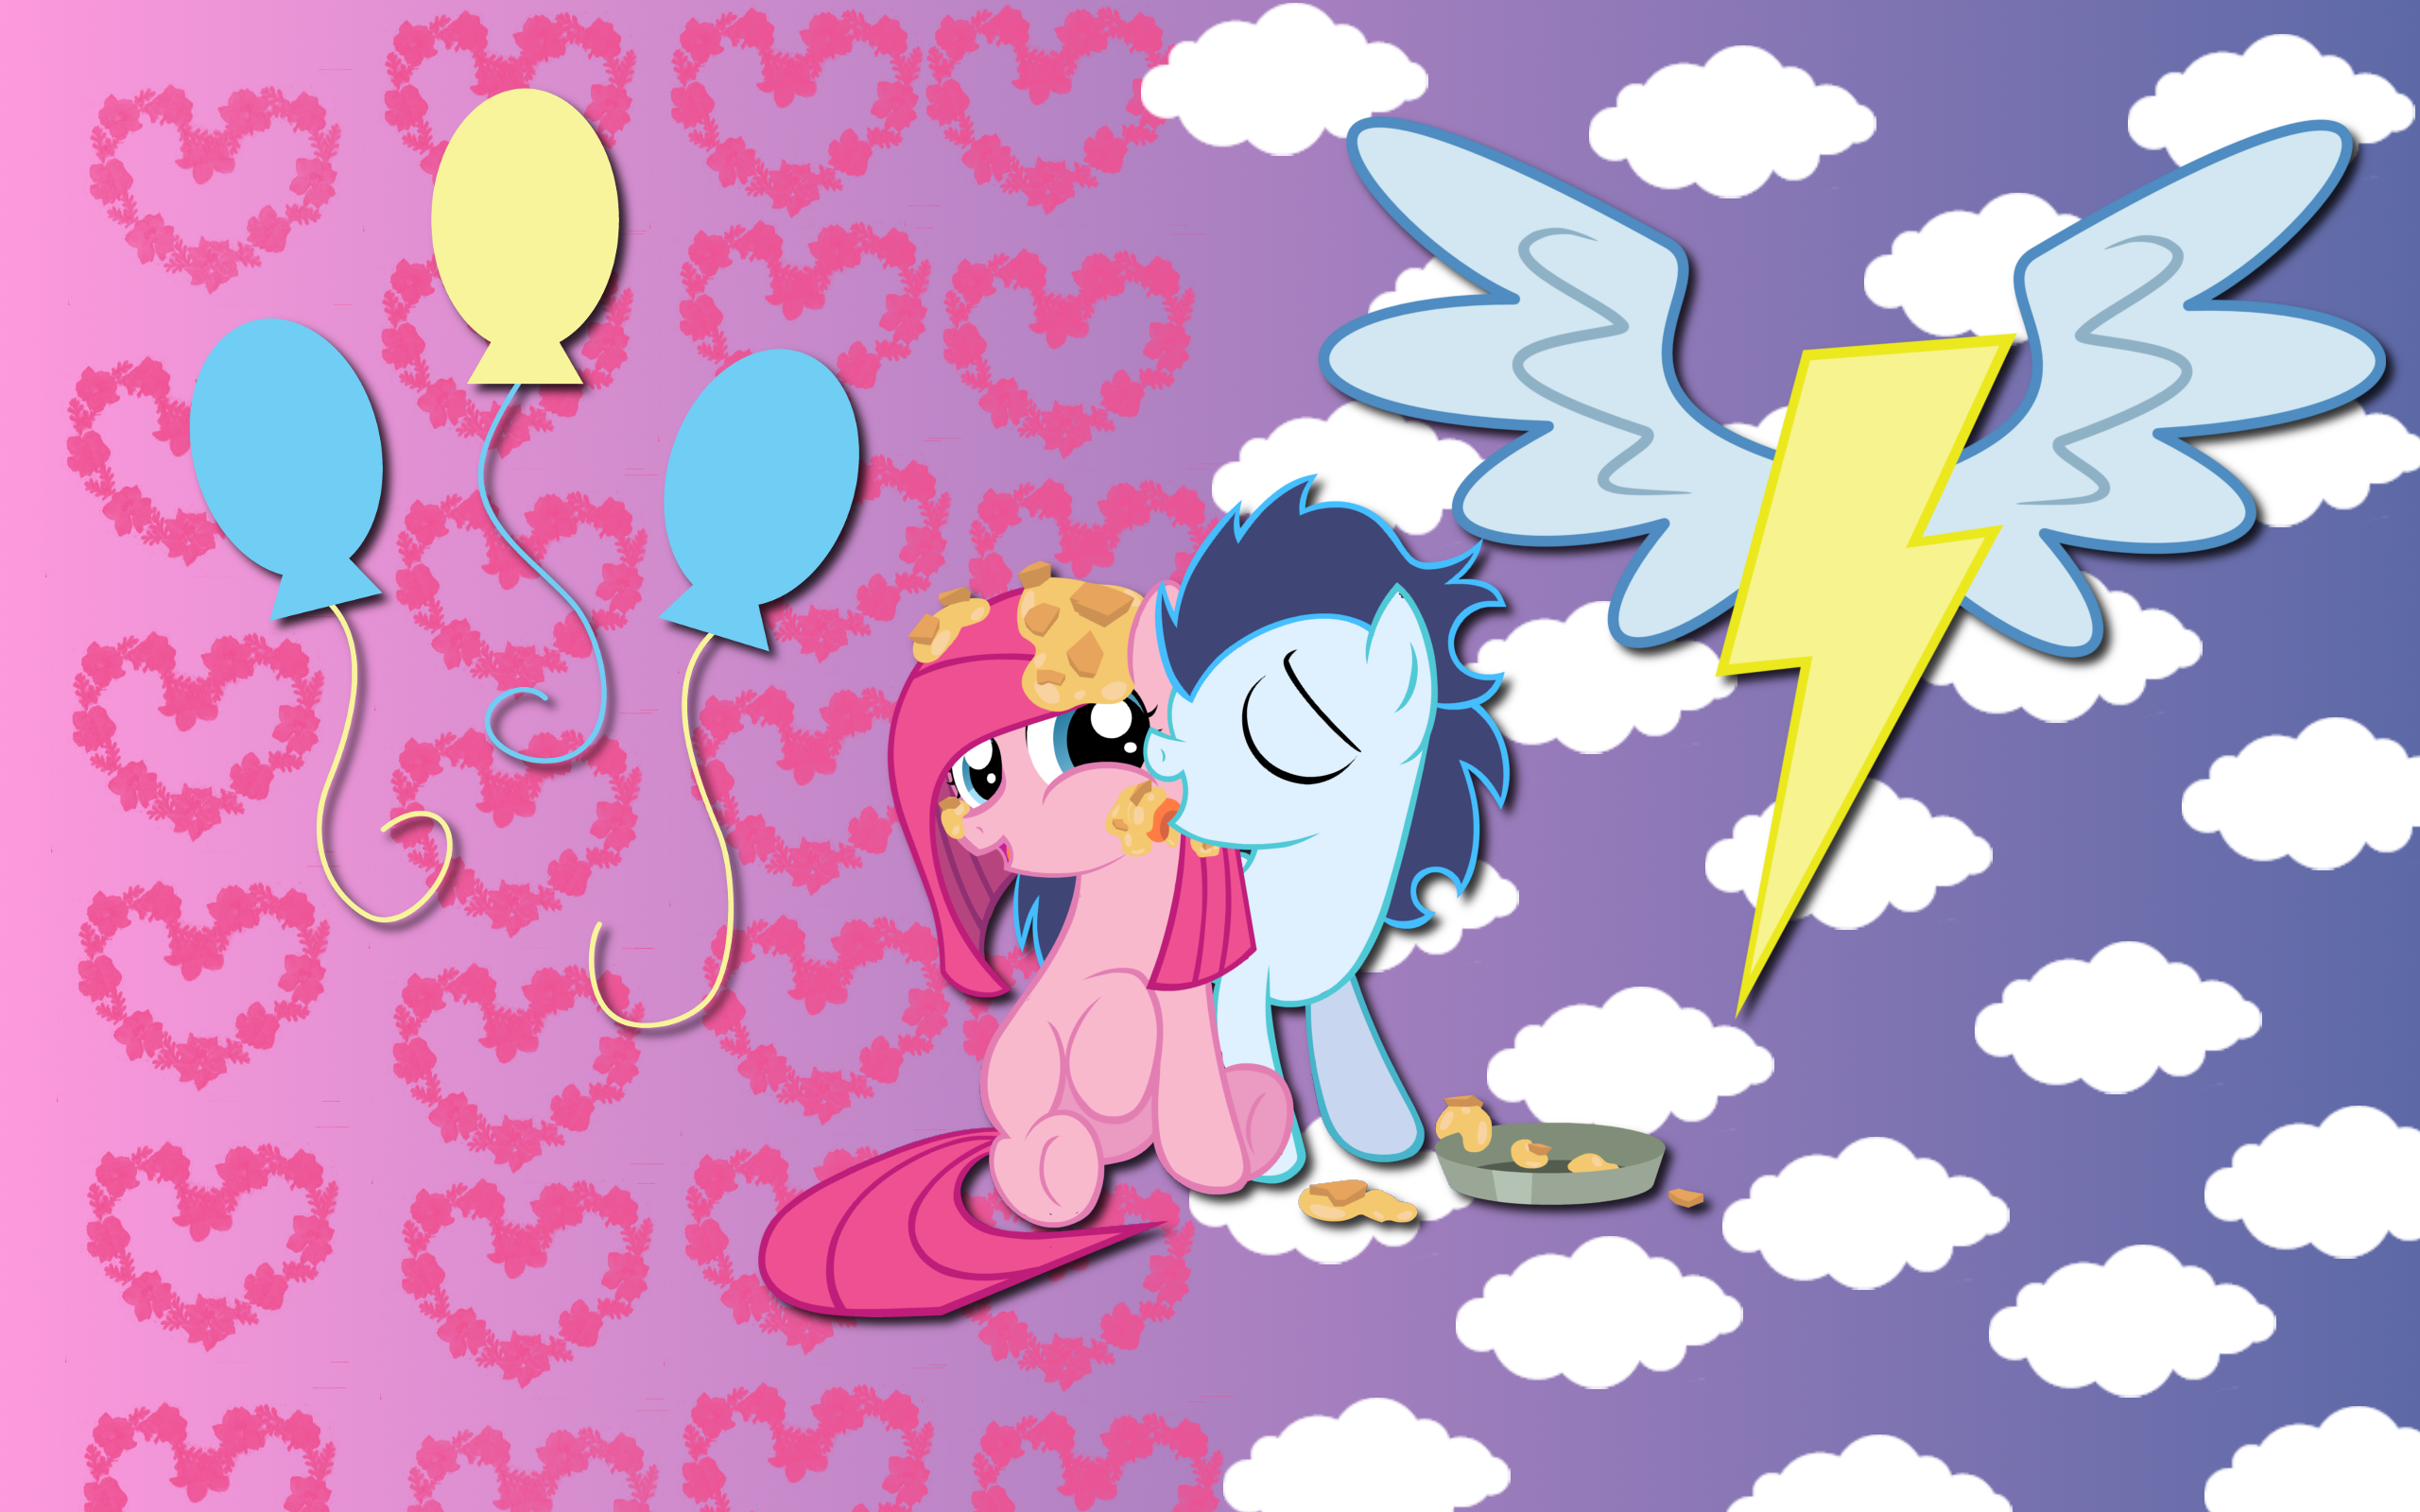 Soarin Pie wallpaper by AliceHumanSacrifice0, MikeTheUser, ooklah and The-Smiling-Pony